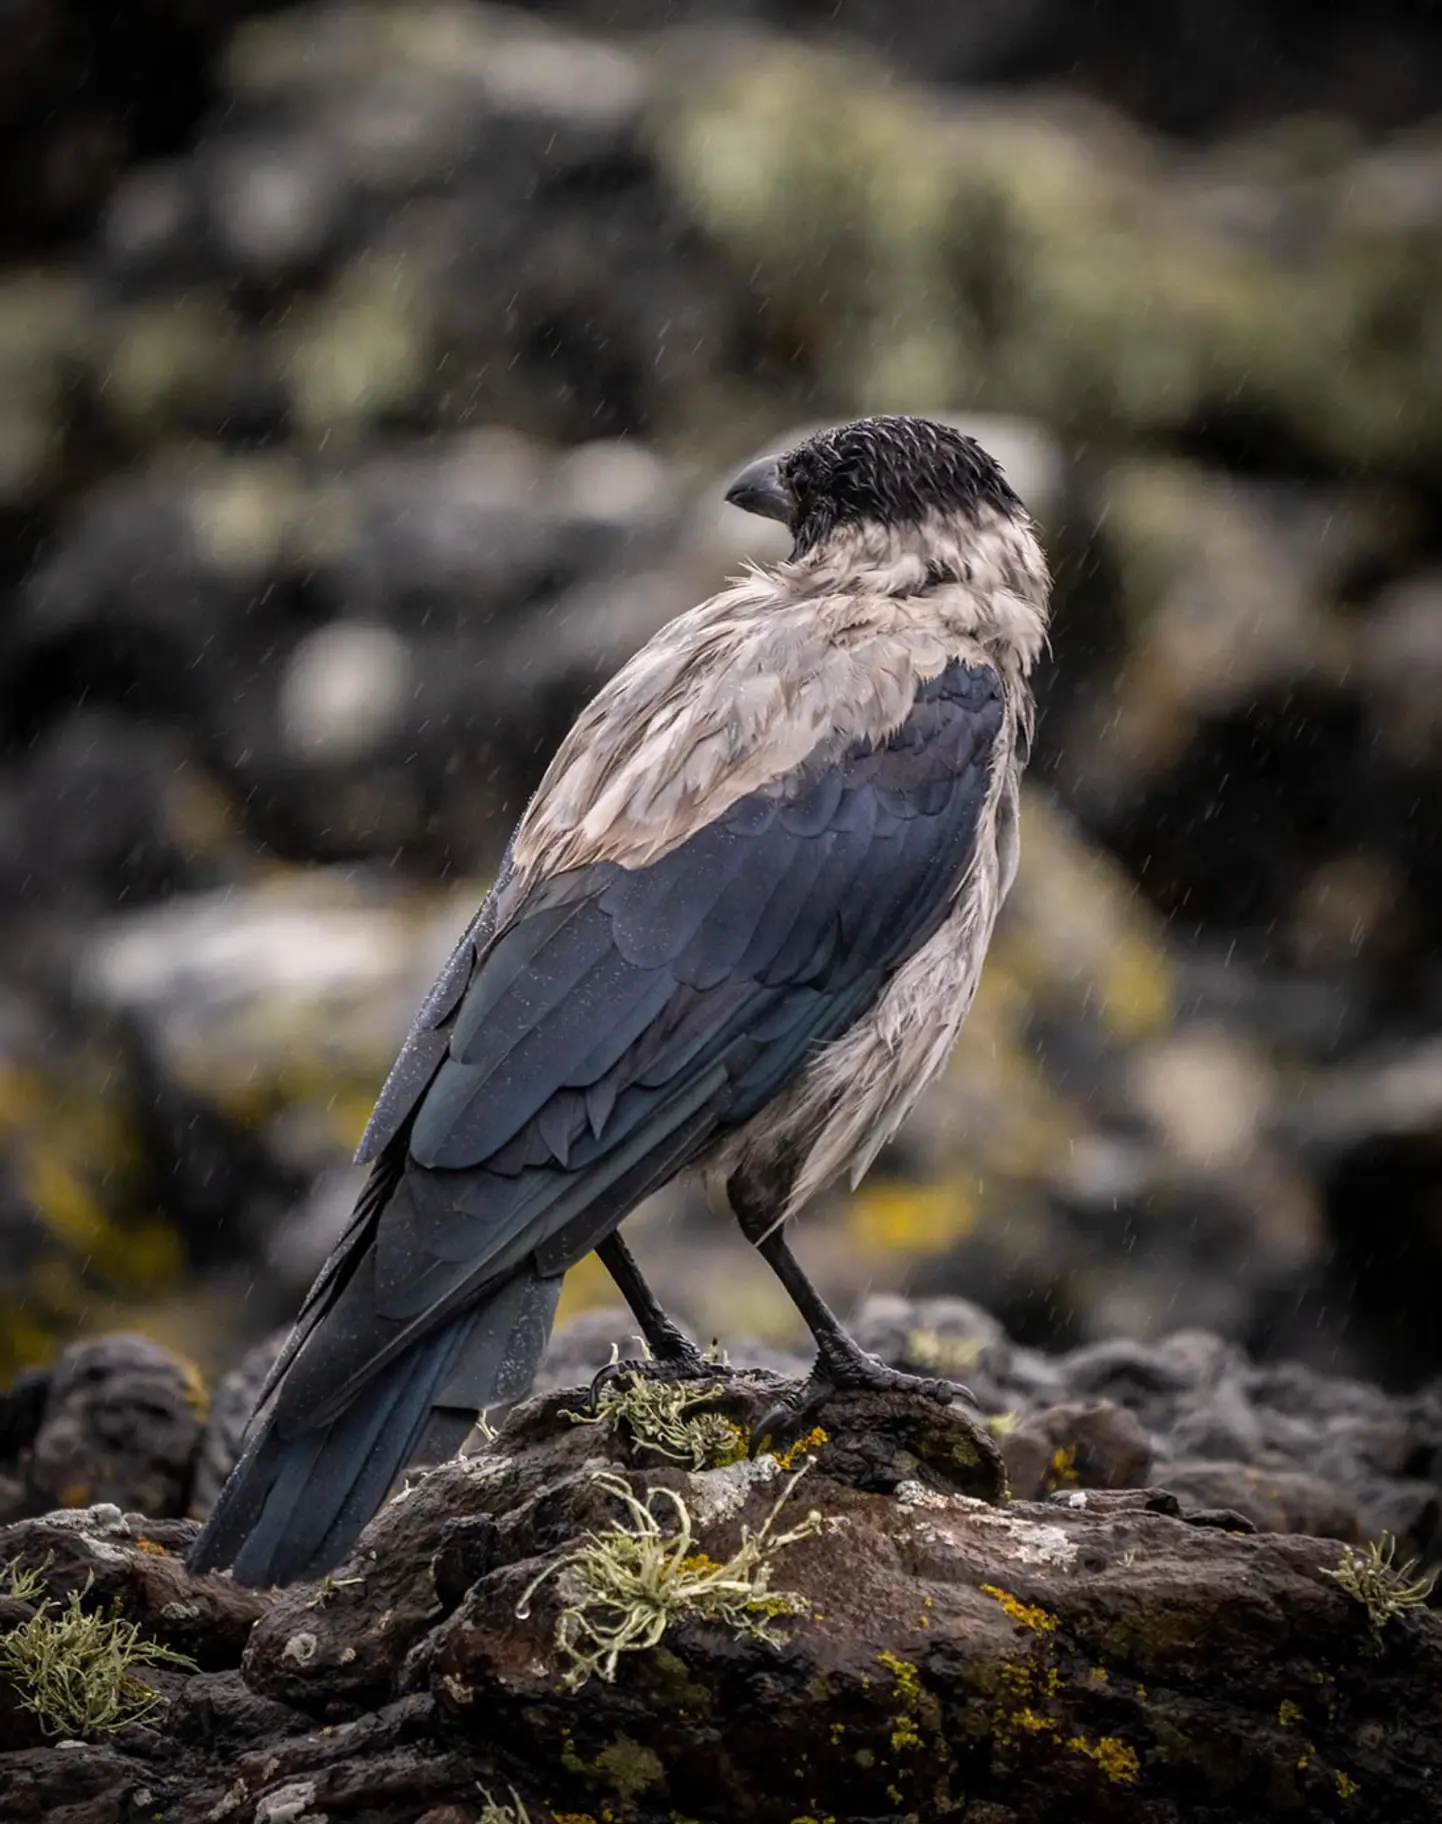 In the foreground quite a large bird stands  on a grey rock that’s covered with mustard coloured lichen and green tufts of hardy grass, ragged rocks shapes and rain are in the background. The bird has dark grey-black legs, beak,  hood  and wings, but a distinctive lighter grey neck and plumage.